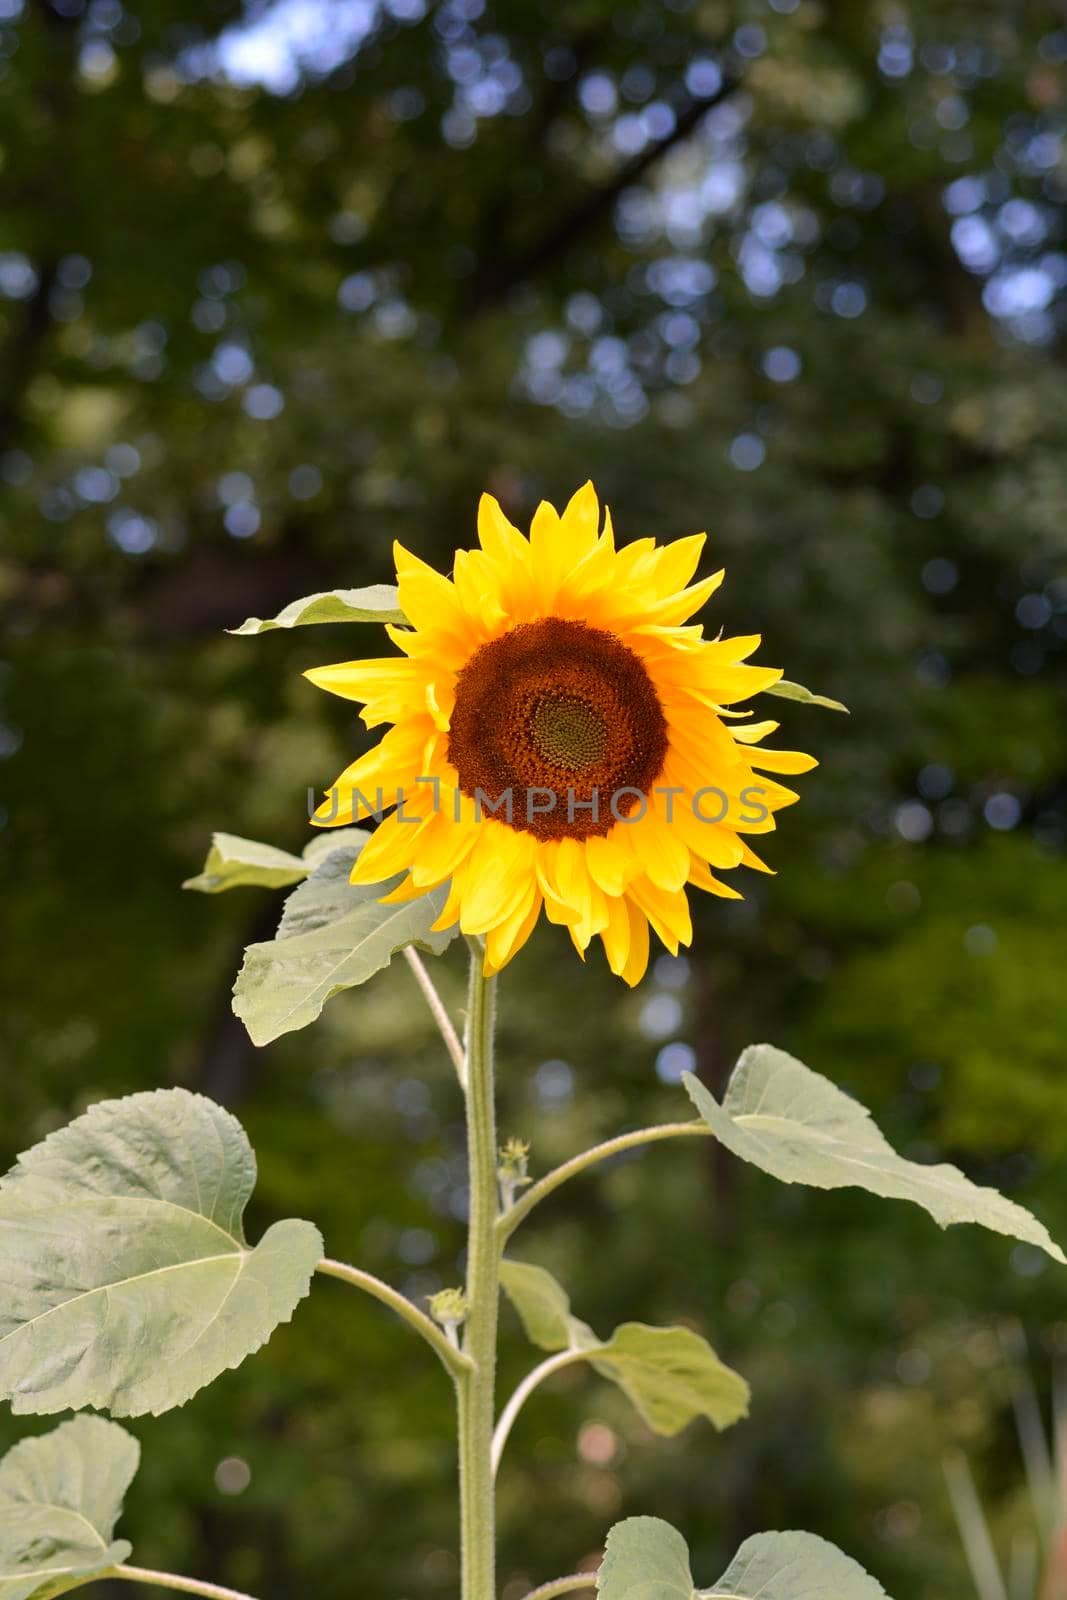 Common sunflower by nahhan